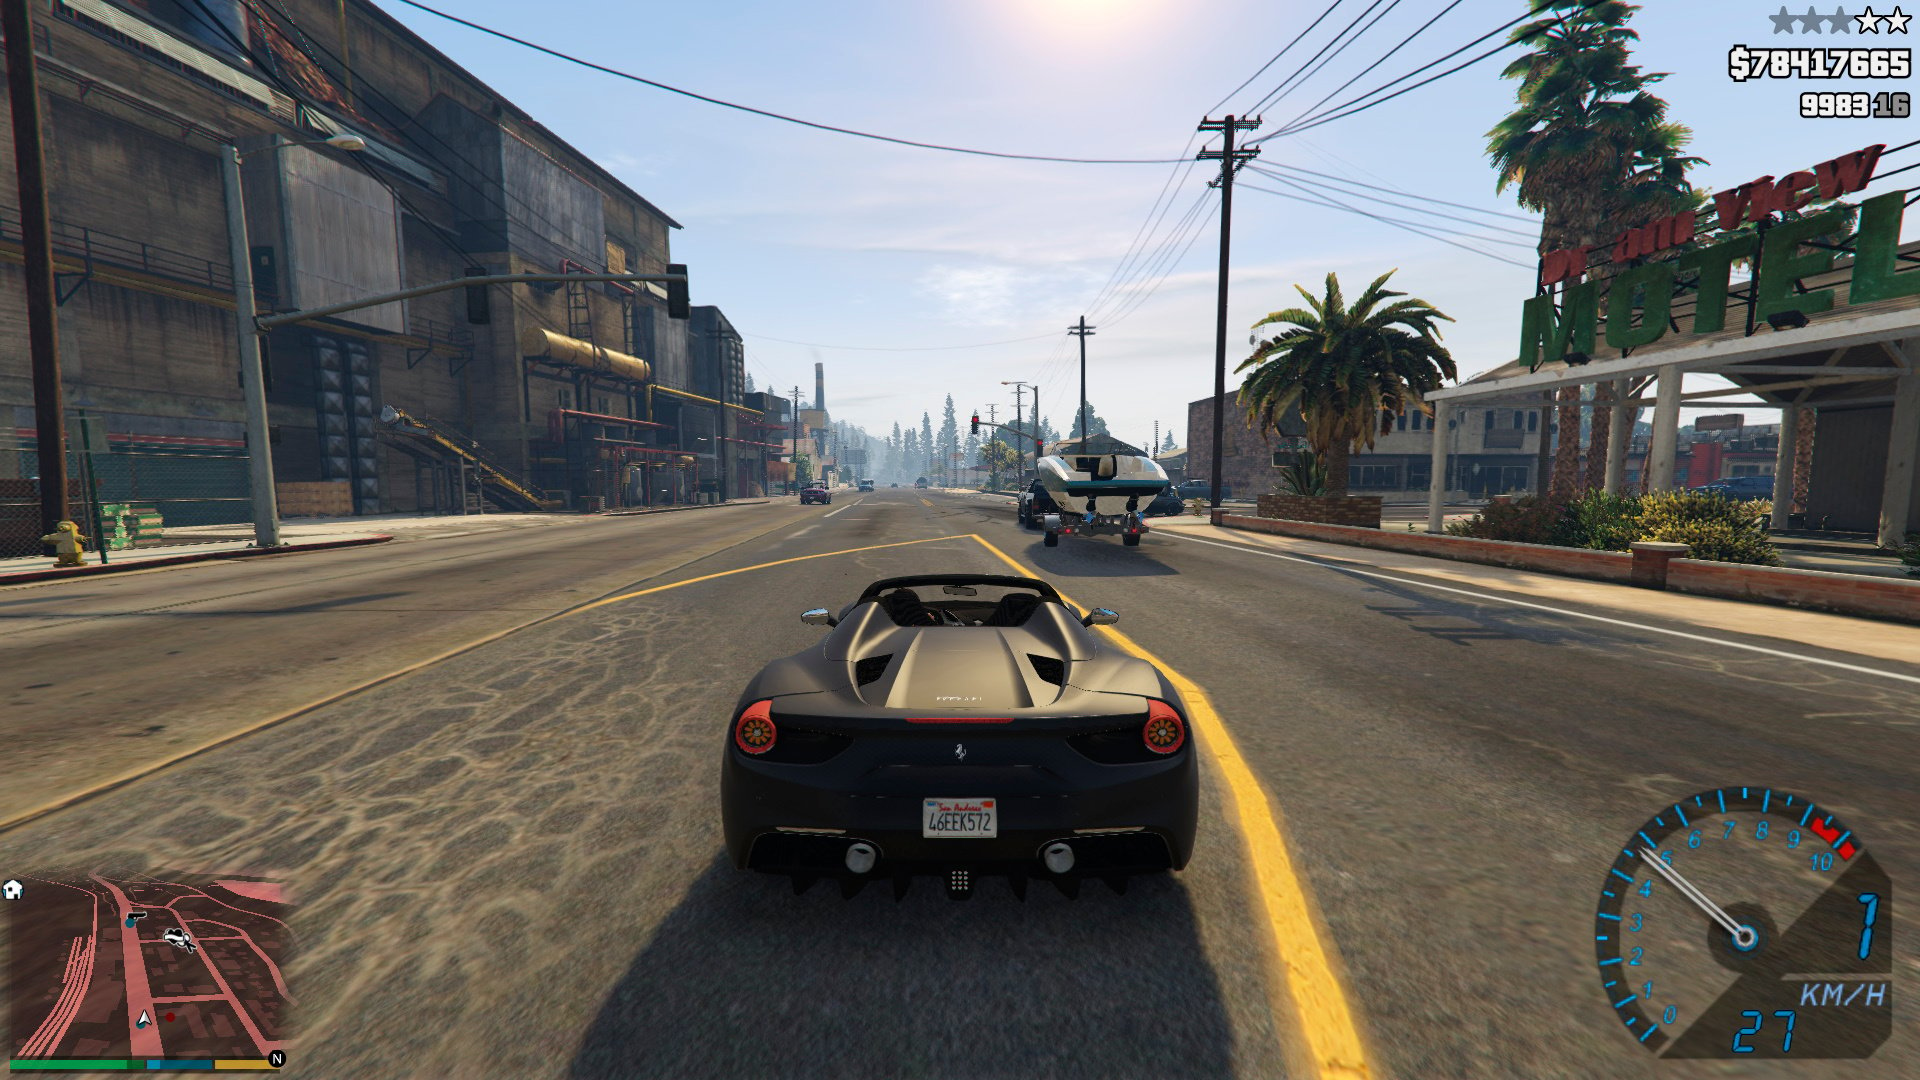 GTA V - The real Expanded & Enhanced (PC Mods) : r/gtavcustoms